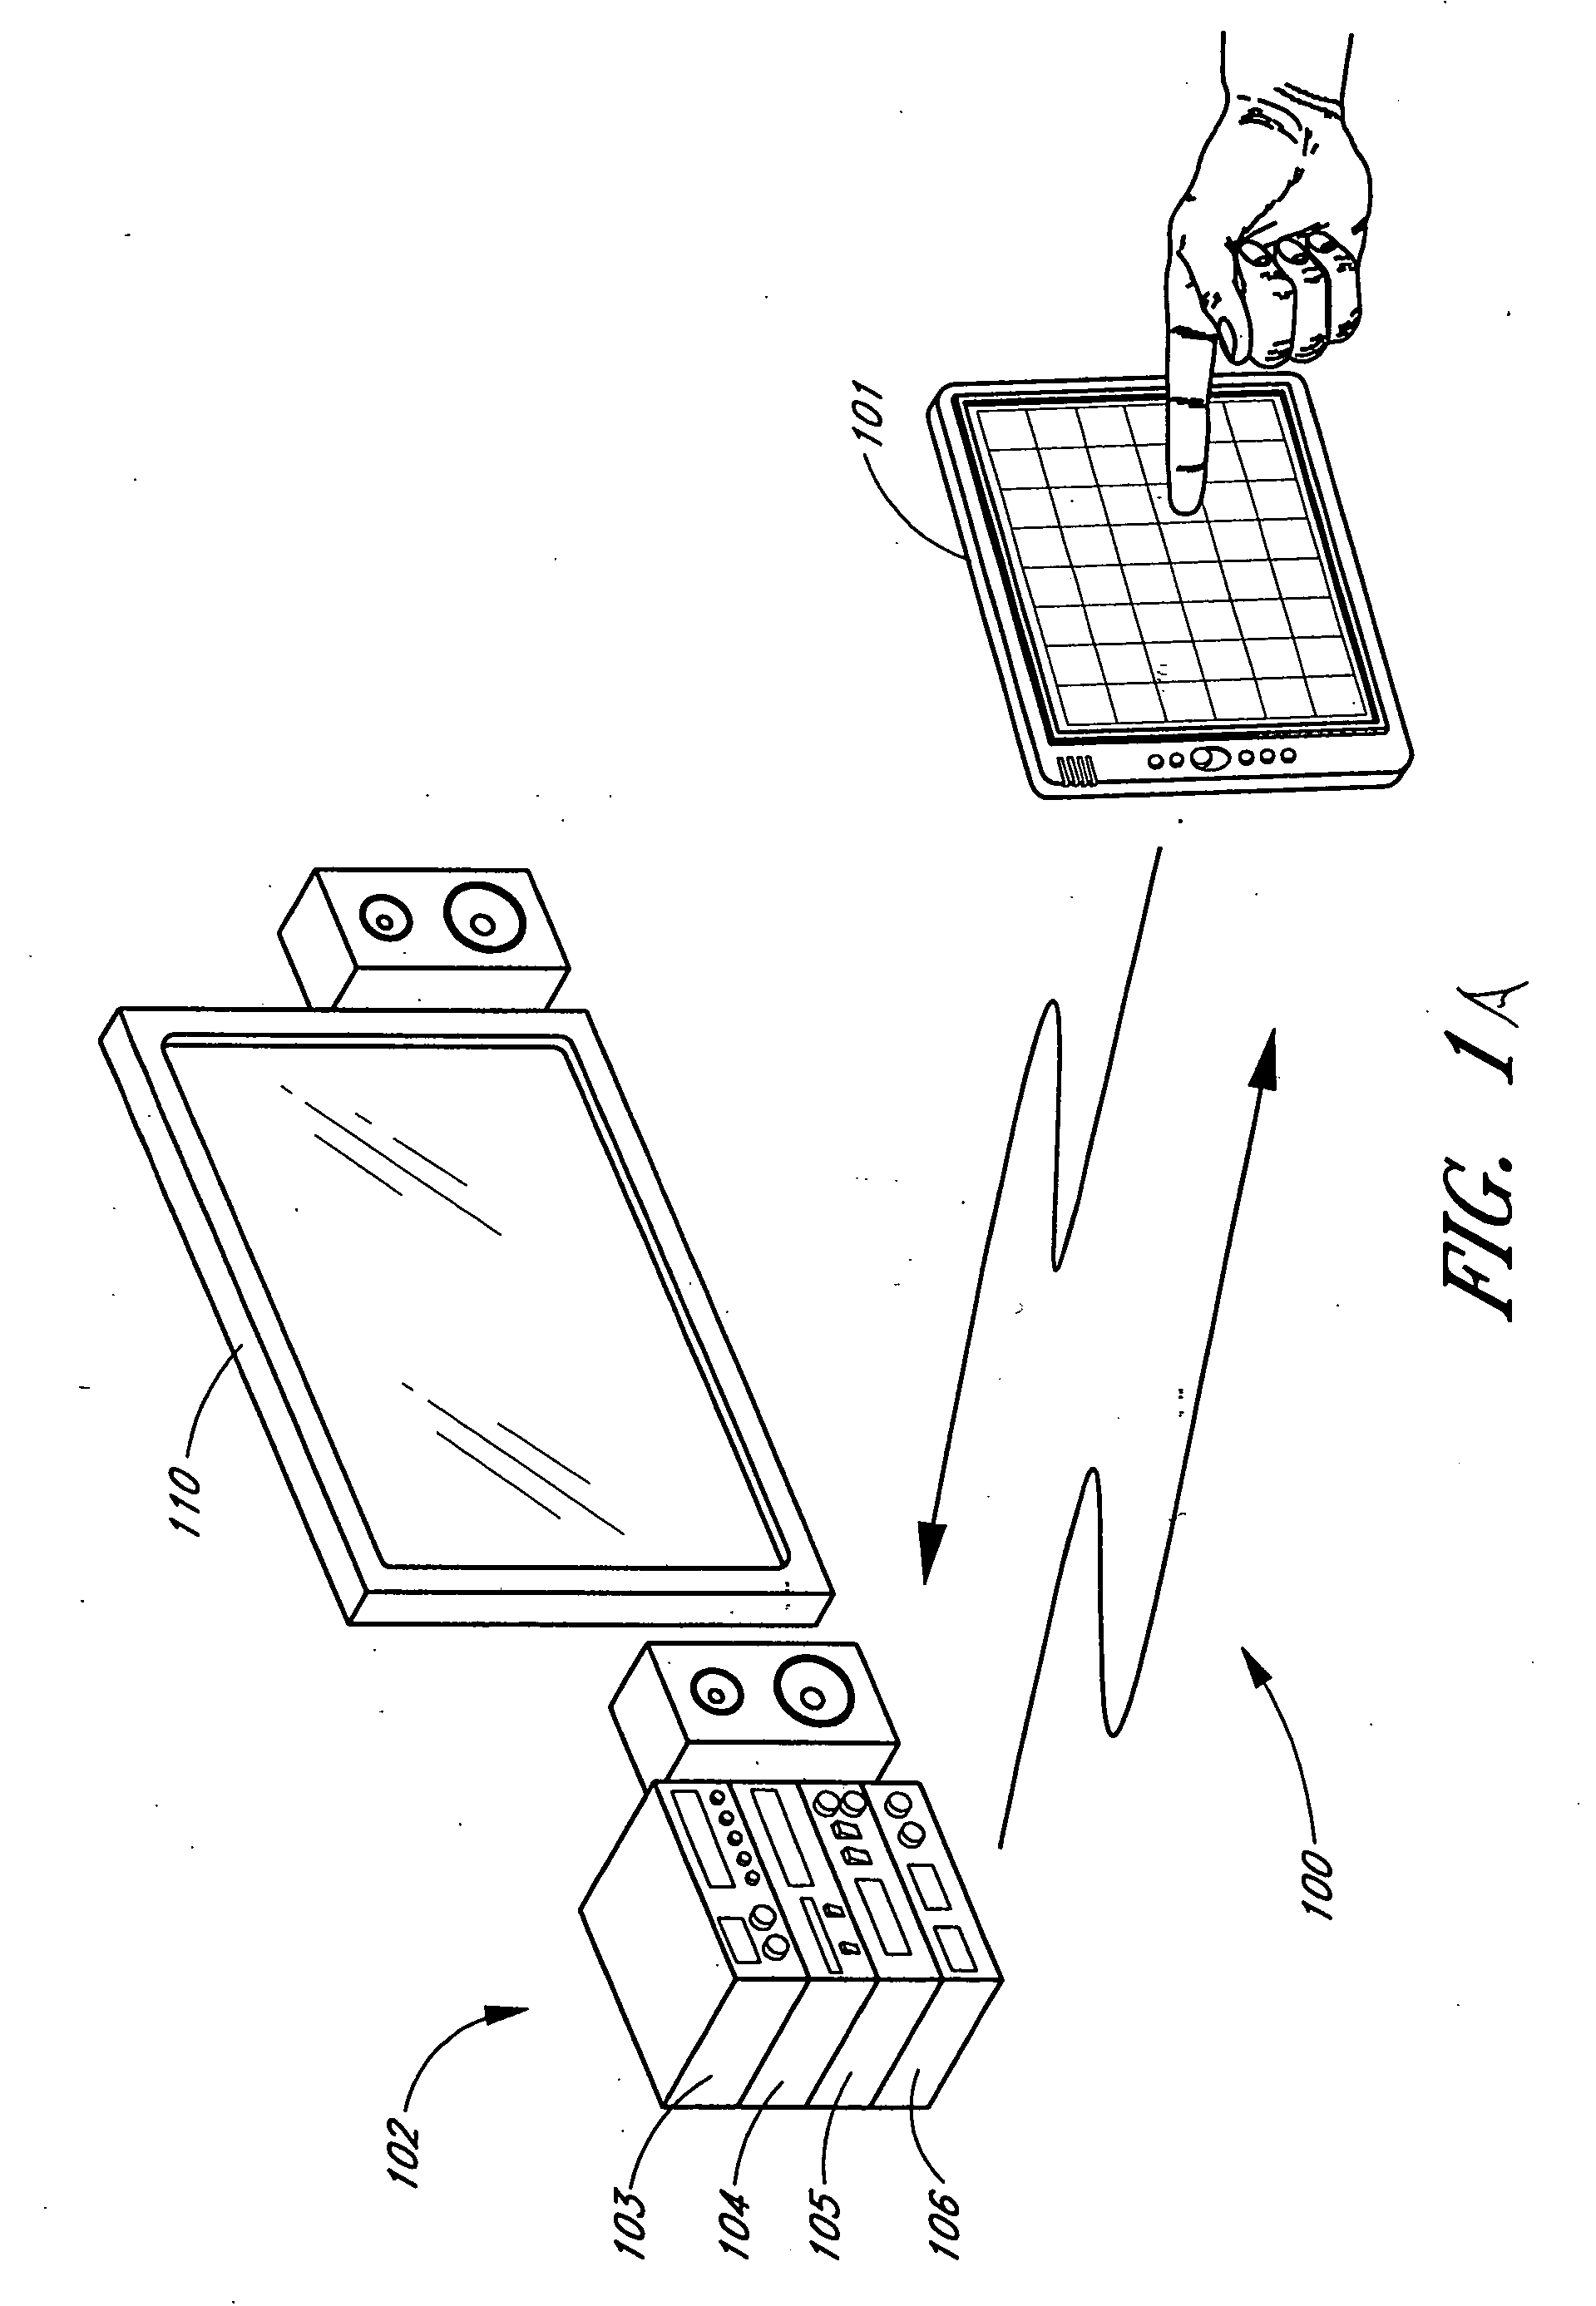 Touch-screen remote control for multimedia equipment